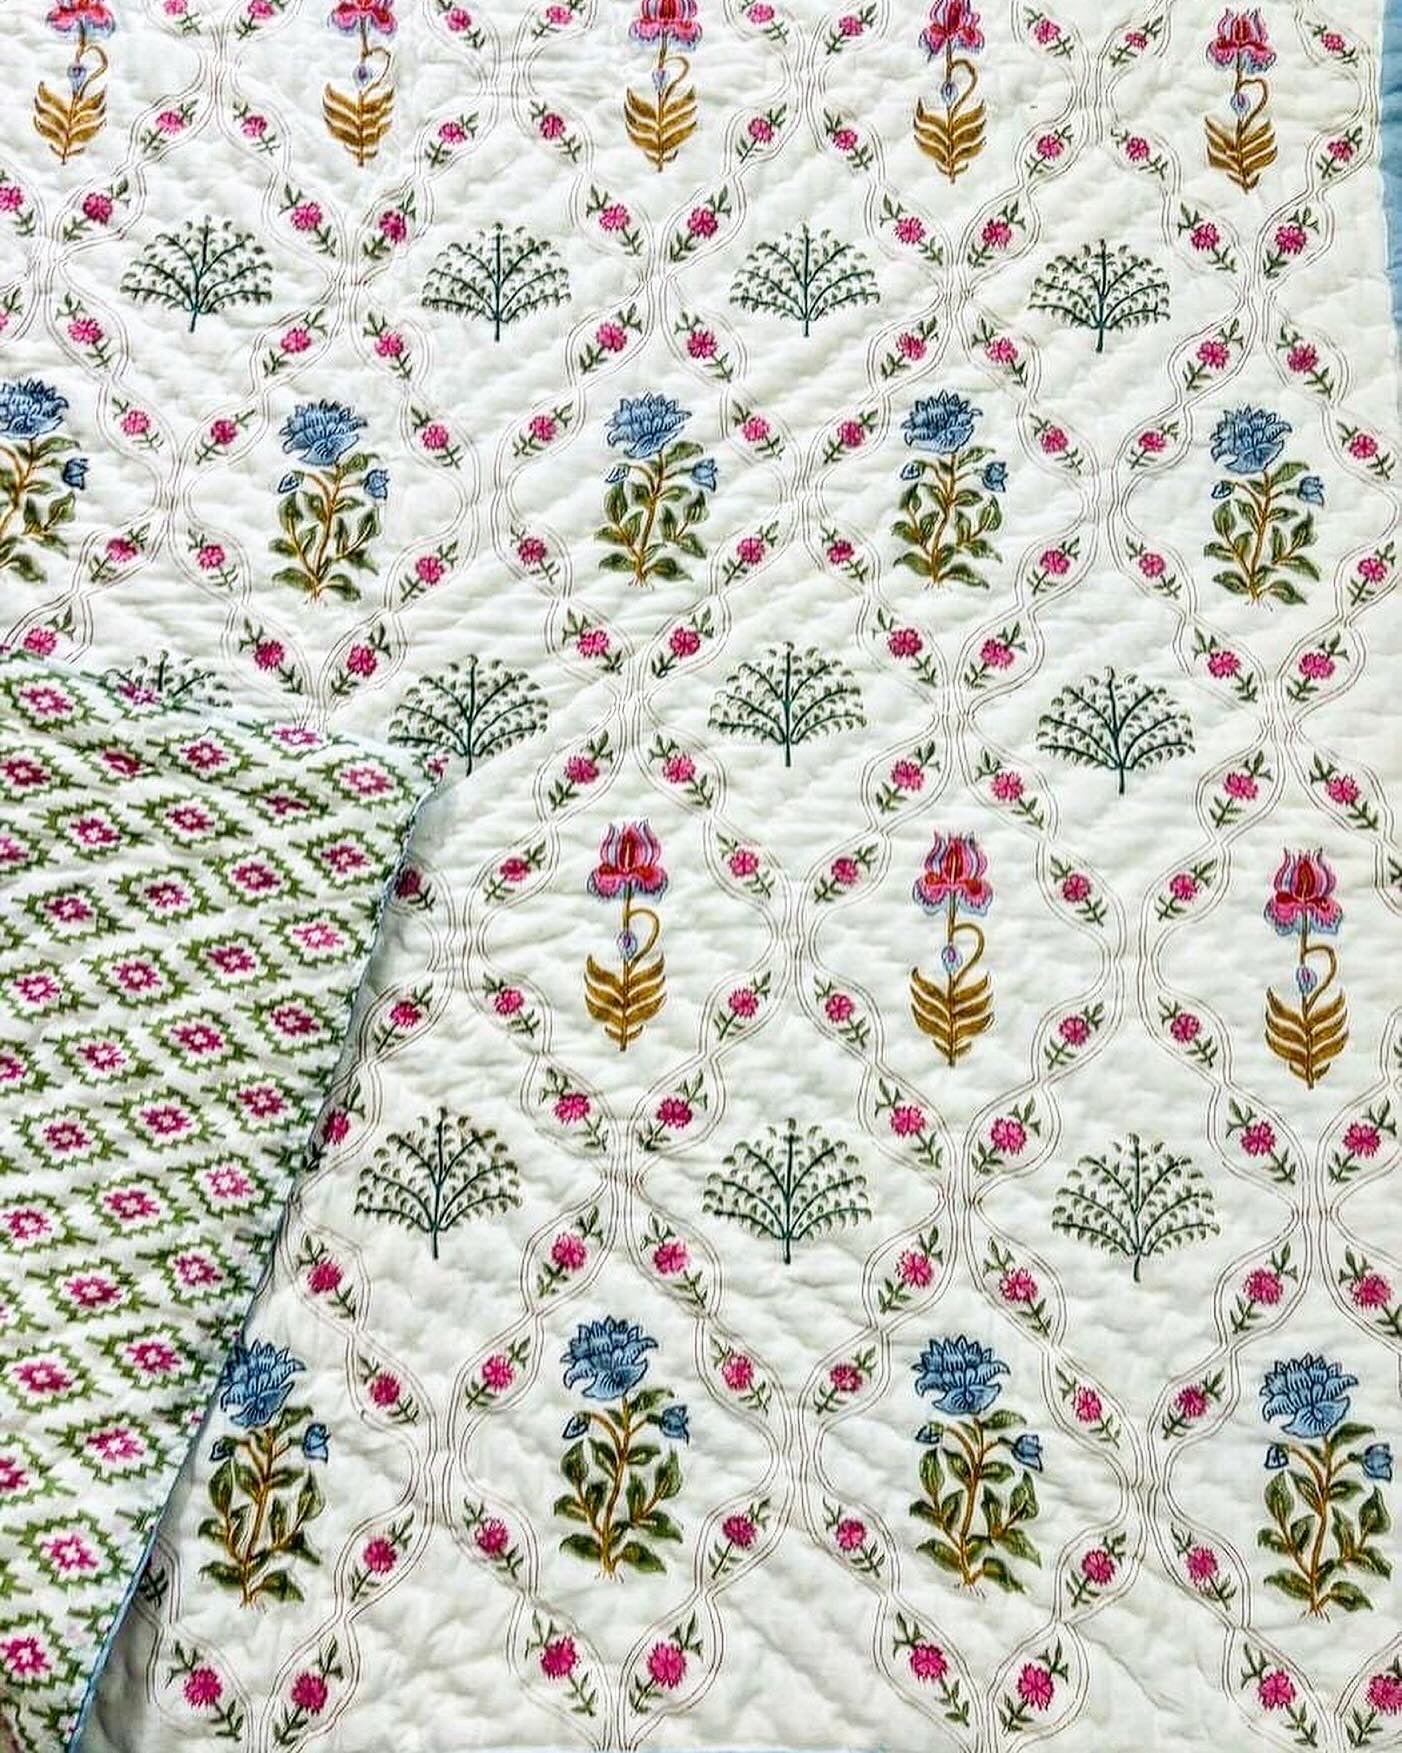 Luxe Summer Light Cotton Muslin Block Printed Quilt - Single Size 60x90 inches